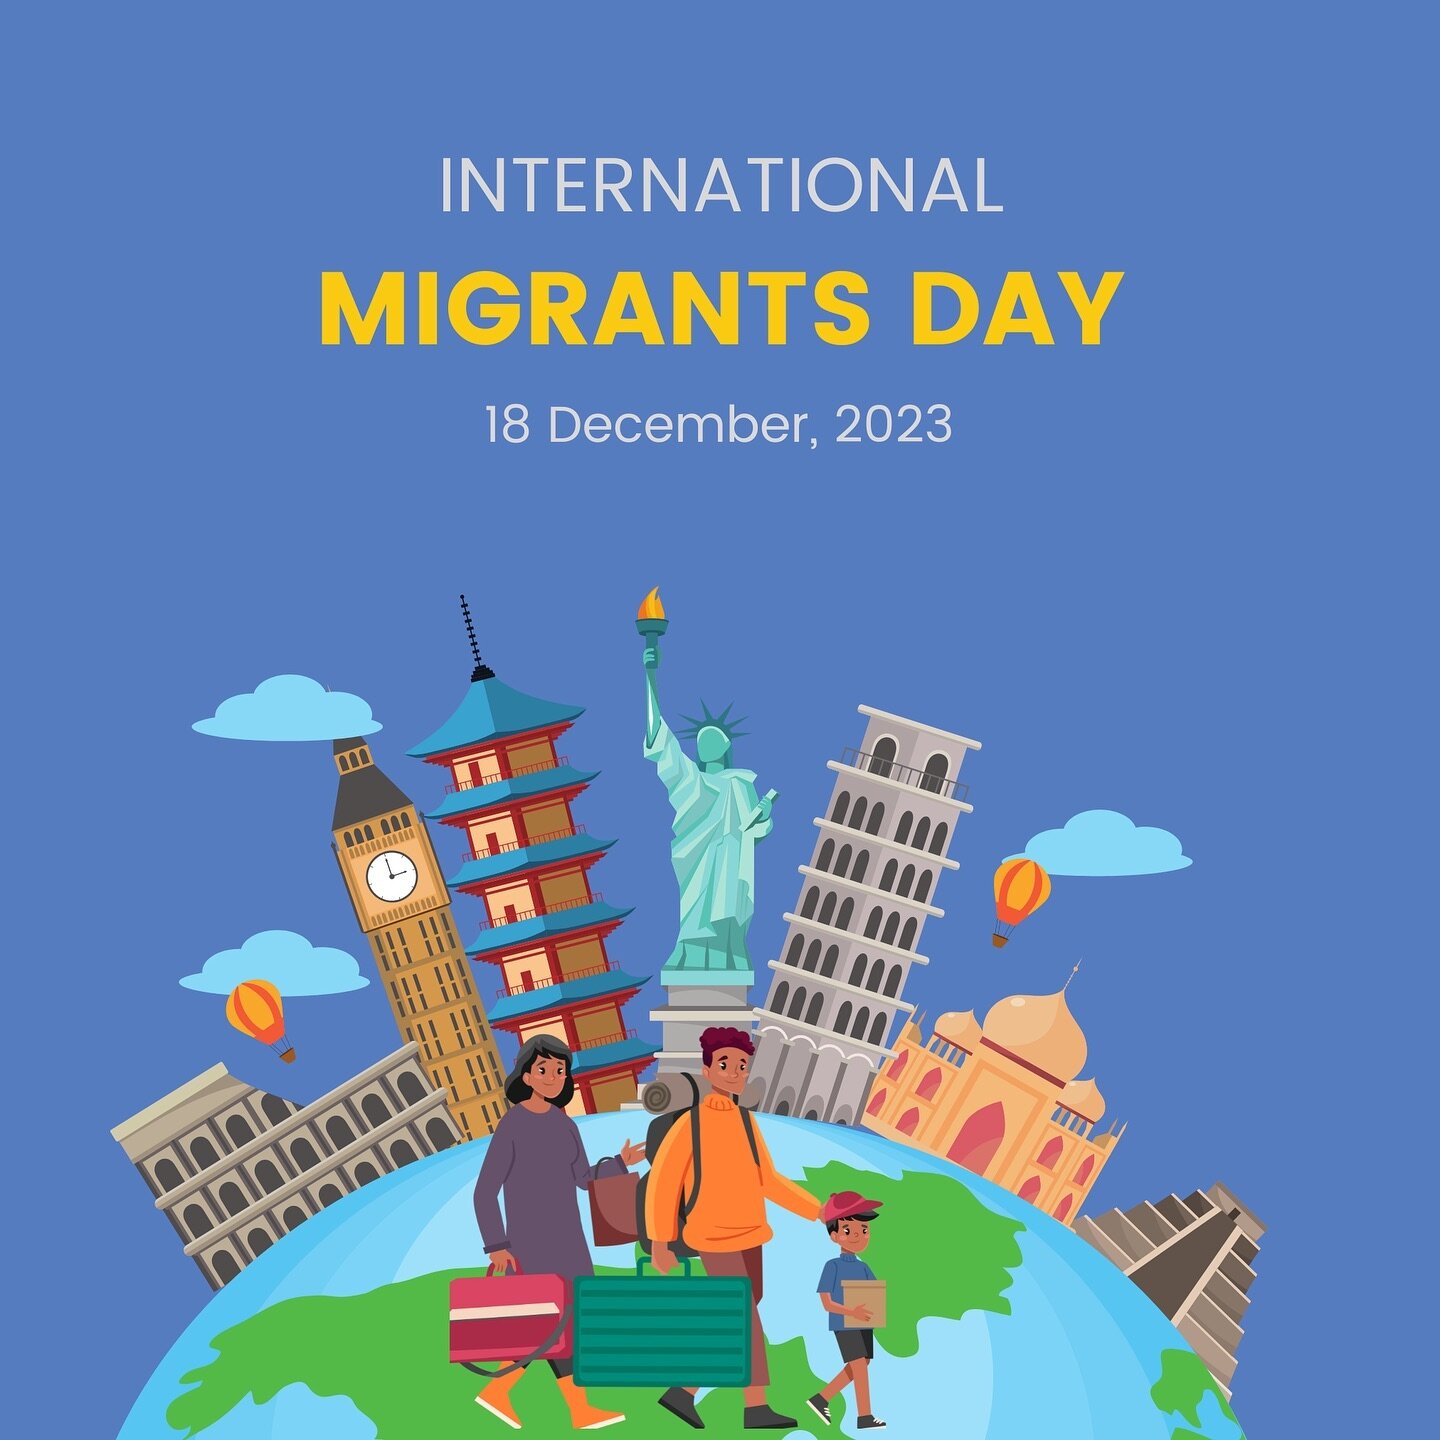 December 18th marks International Migrant Day; a day set aside to commemorate the significant contributions of migrants while highlighting the challenges they still face today.

This day serves as a crucial reminder to respect the rights of migrants,